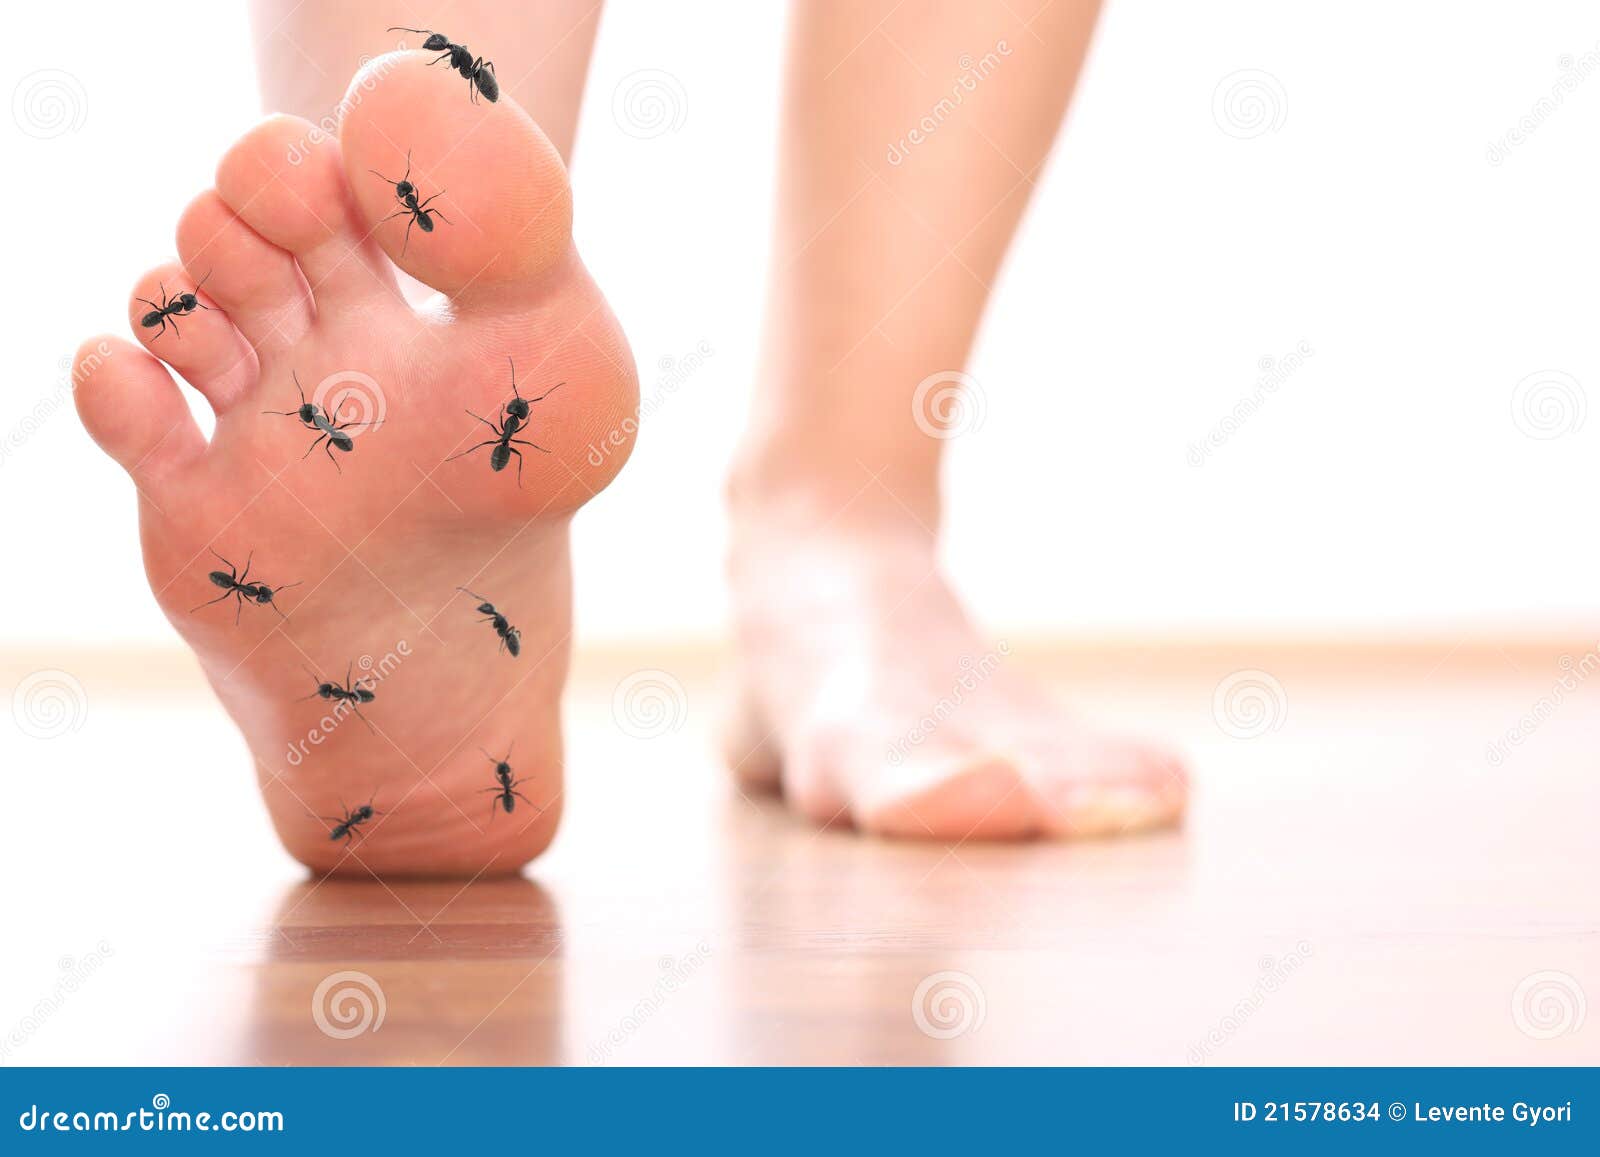 foot stepping ant chicle diabetes leg